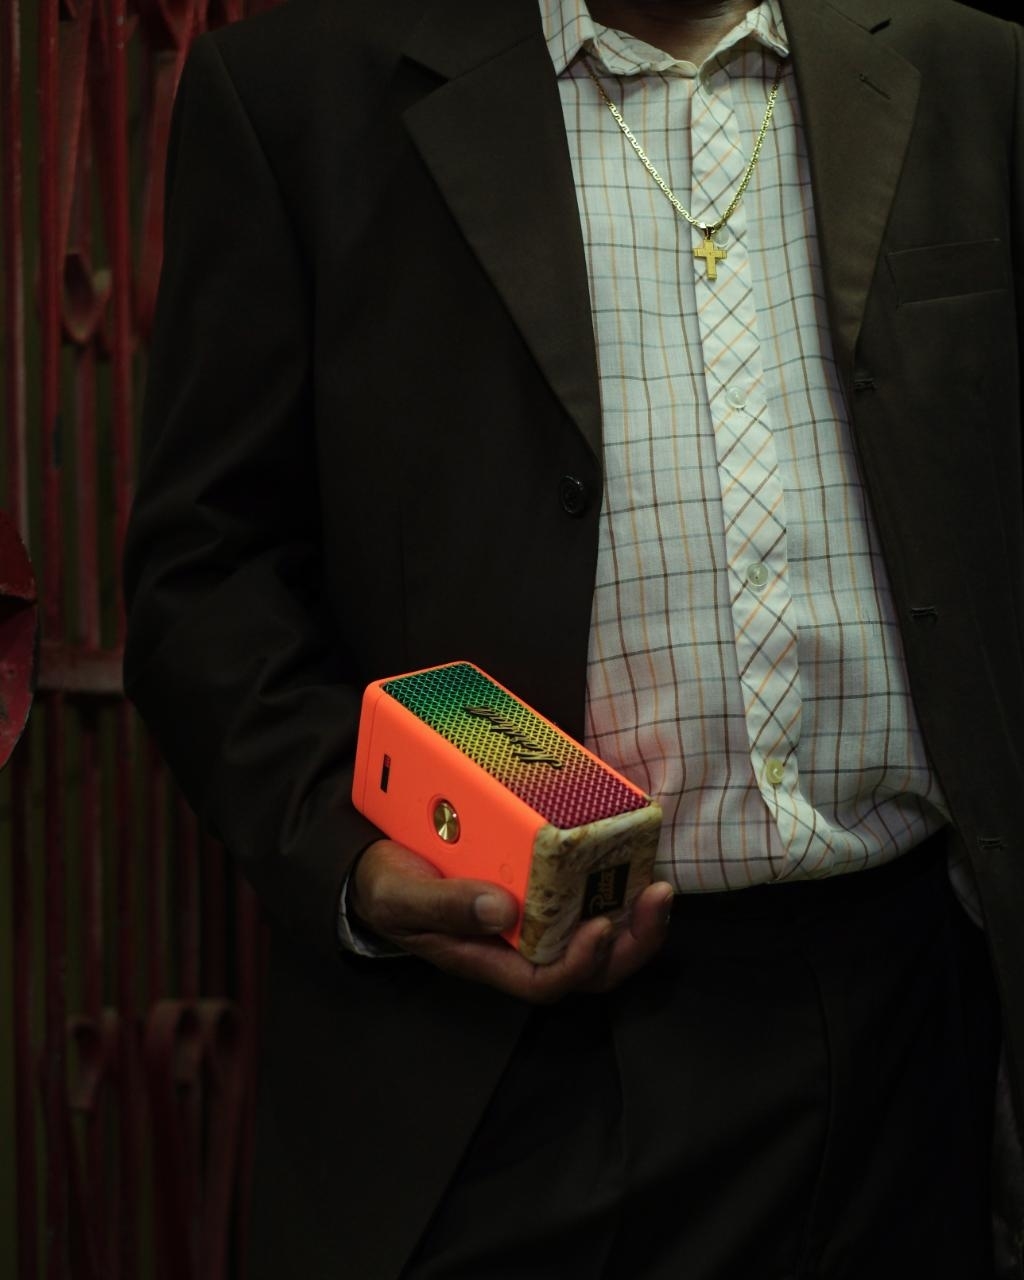 Person in a suit holding a small, colorful object. Details or identity unknown